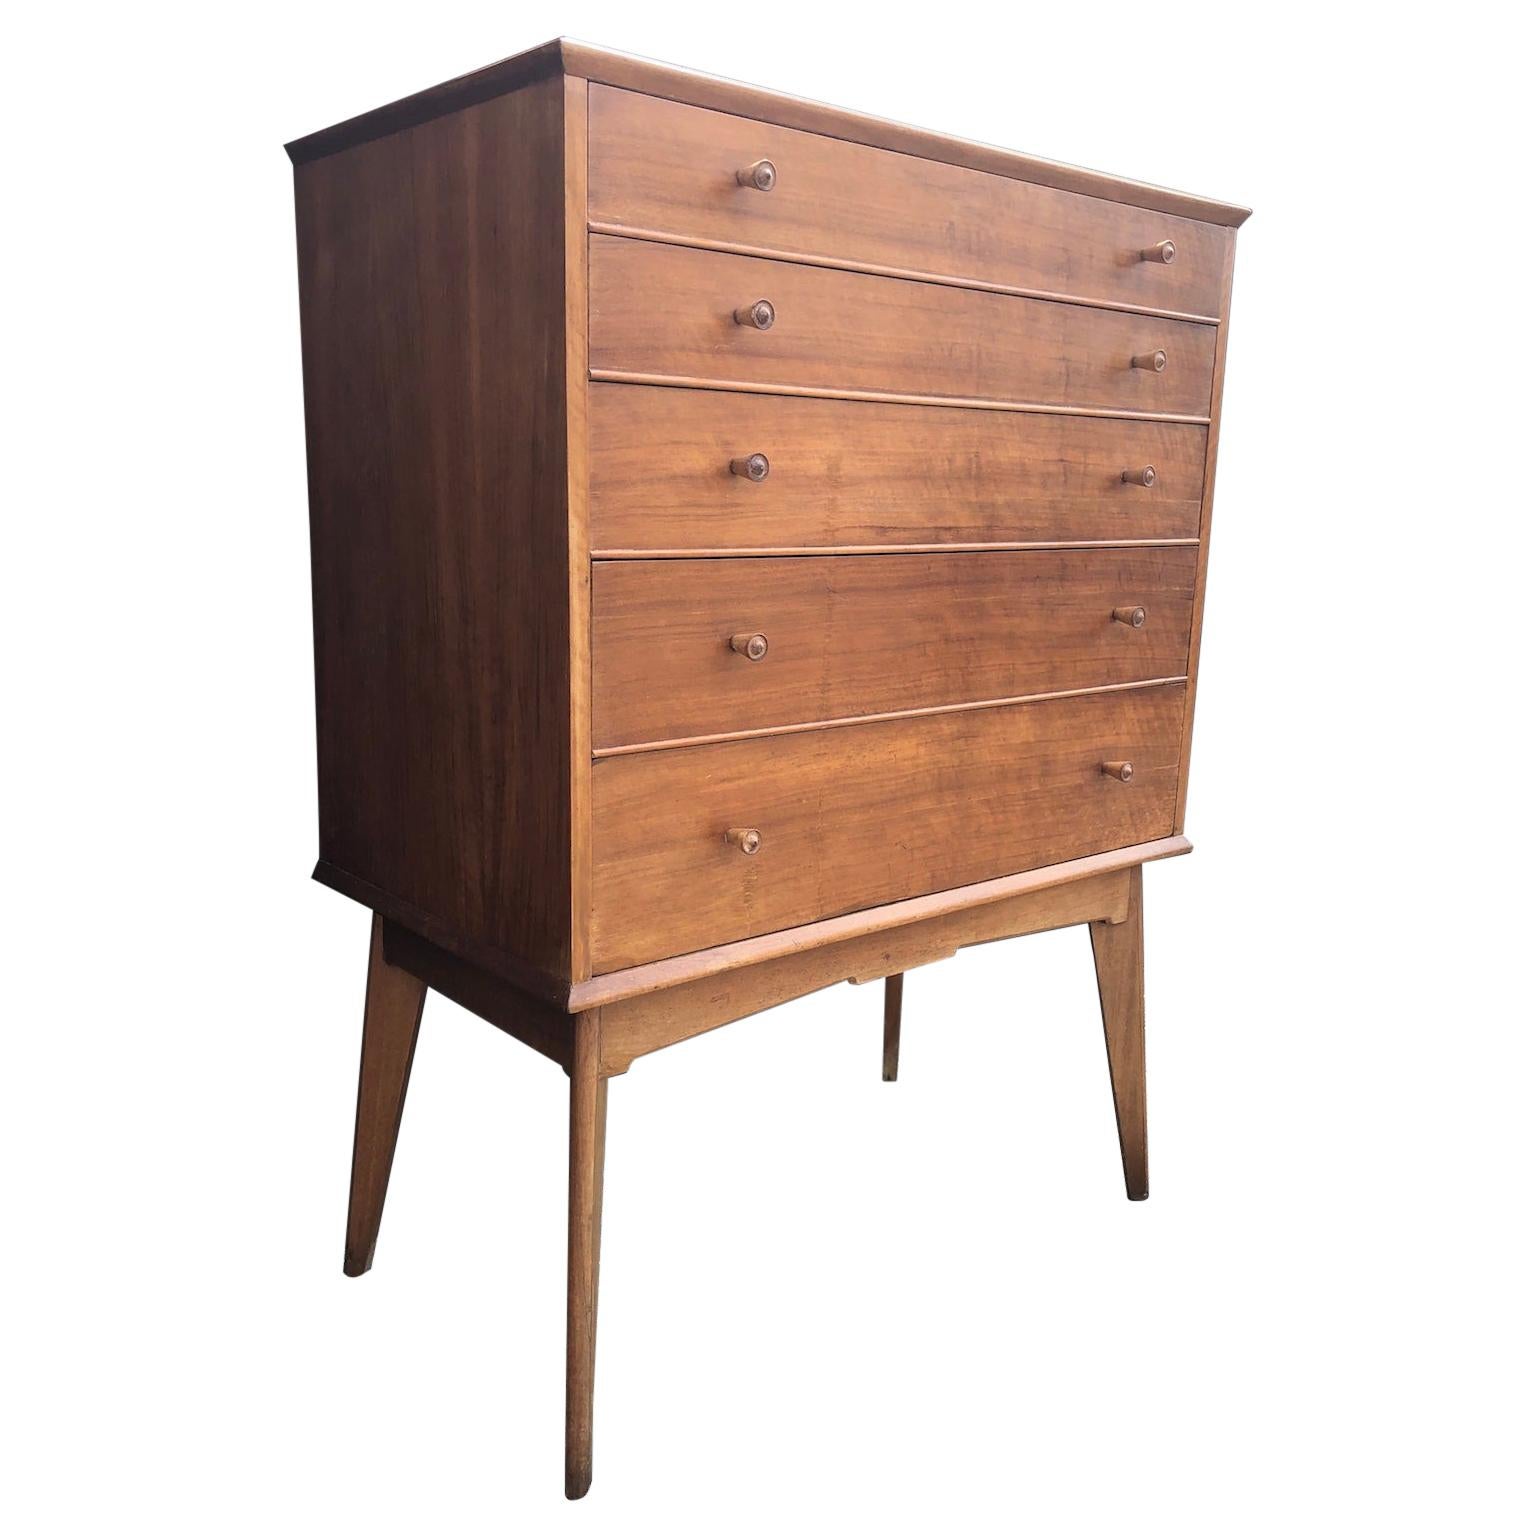 Midcentury Chest of Drawers on Legs, Tallboy by Alfred Cox for Heals, UK, 1950s